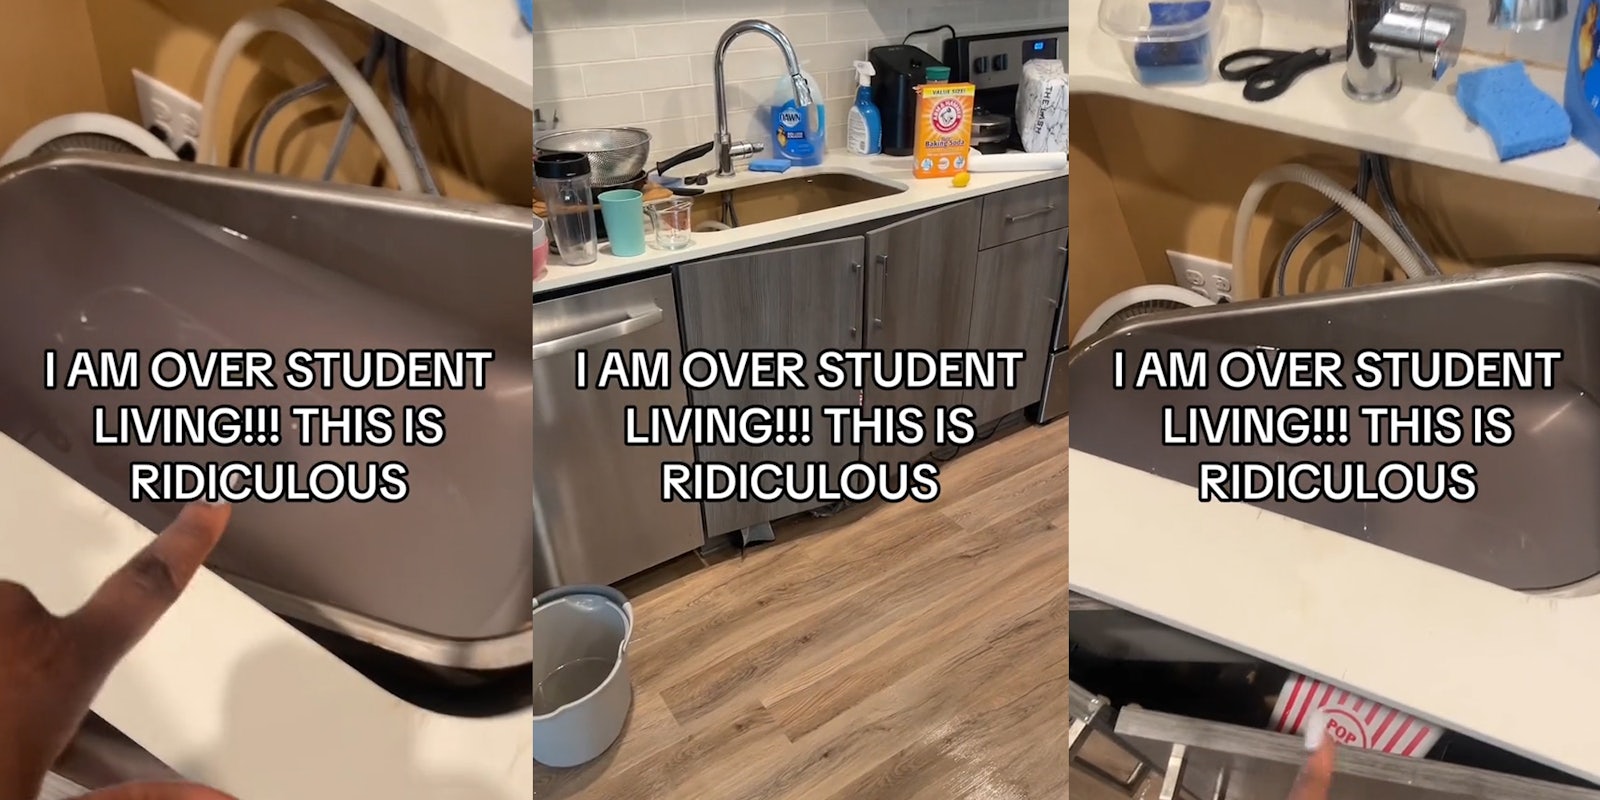 tenant's sink with caption 'I AM OVER STUDENT LIVING!!! THIS I RIDICULOUS' (l) tenant's sink with caption 'I AM OVER STUDENT LIVING!!! THIS I RIDICULOUS' (c) tenant's sink with caption 'I AM OVER STUDENT LIVING!!! THIS I RIDICULOUS' (r)